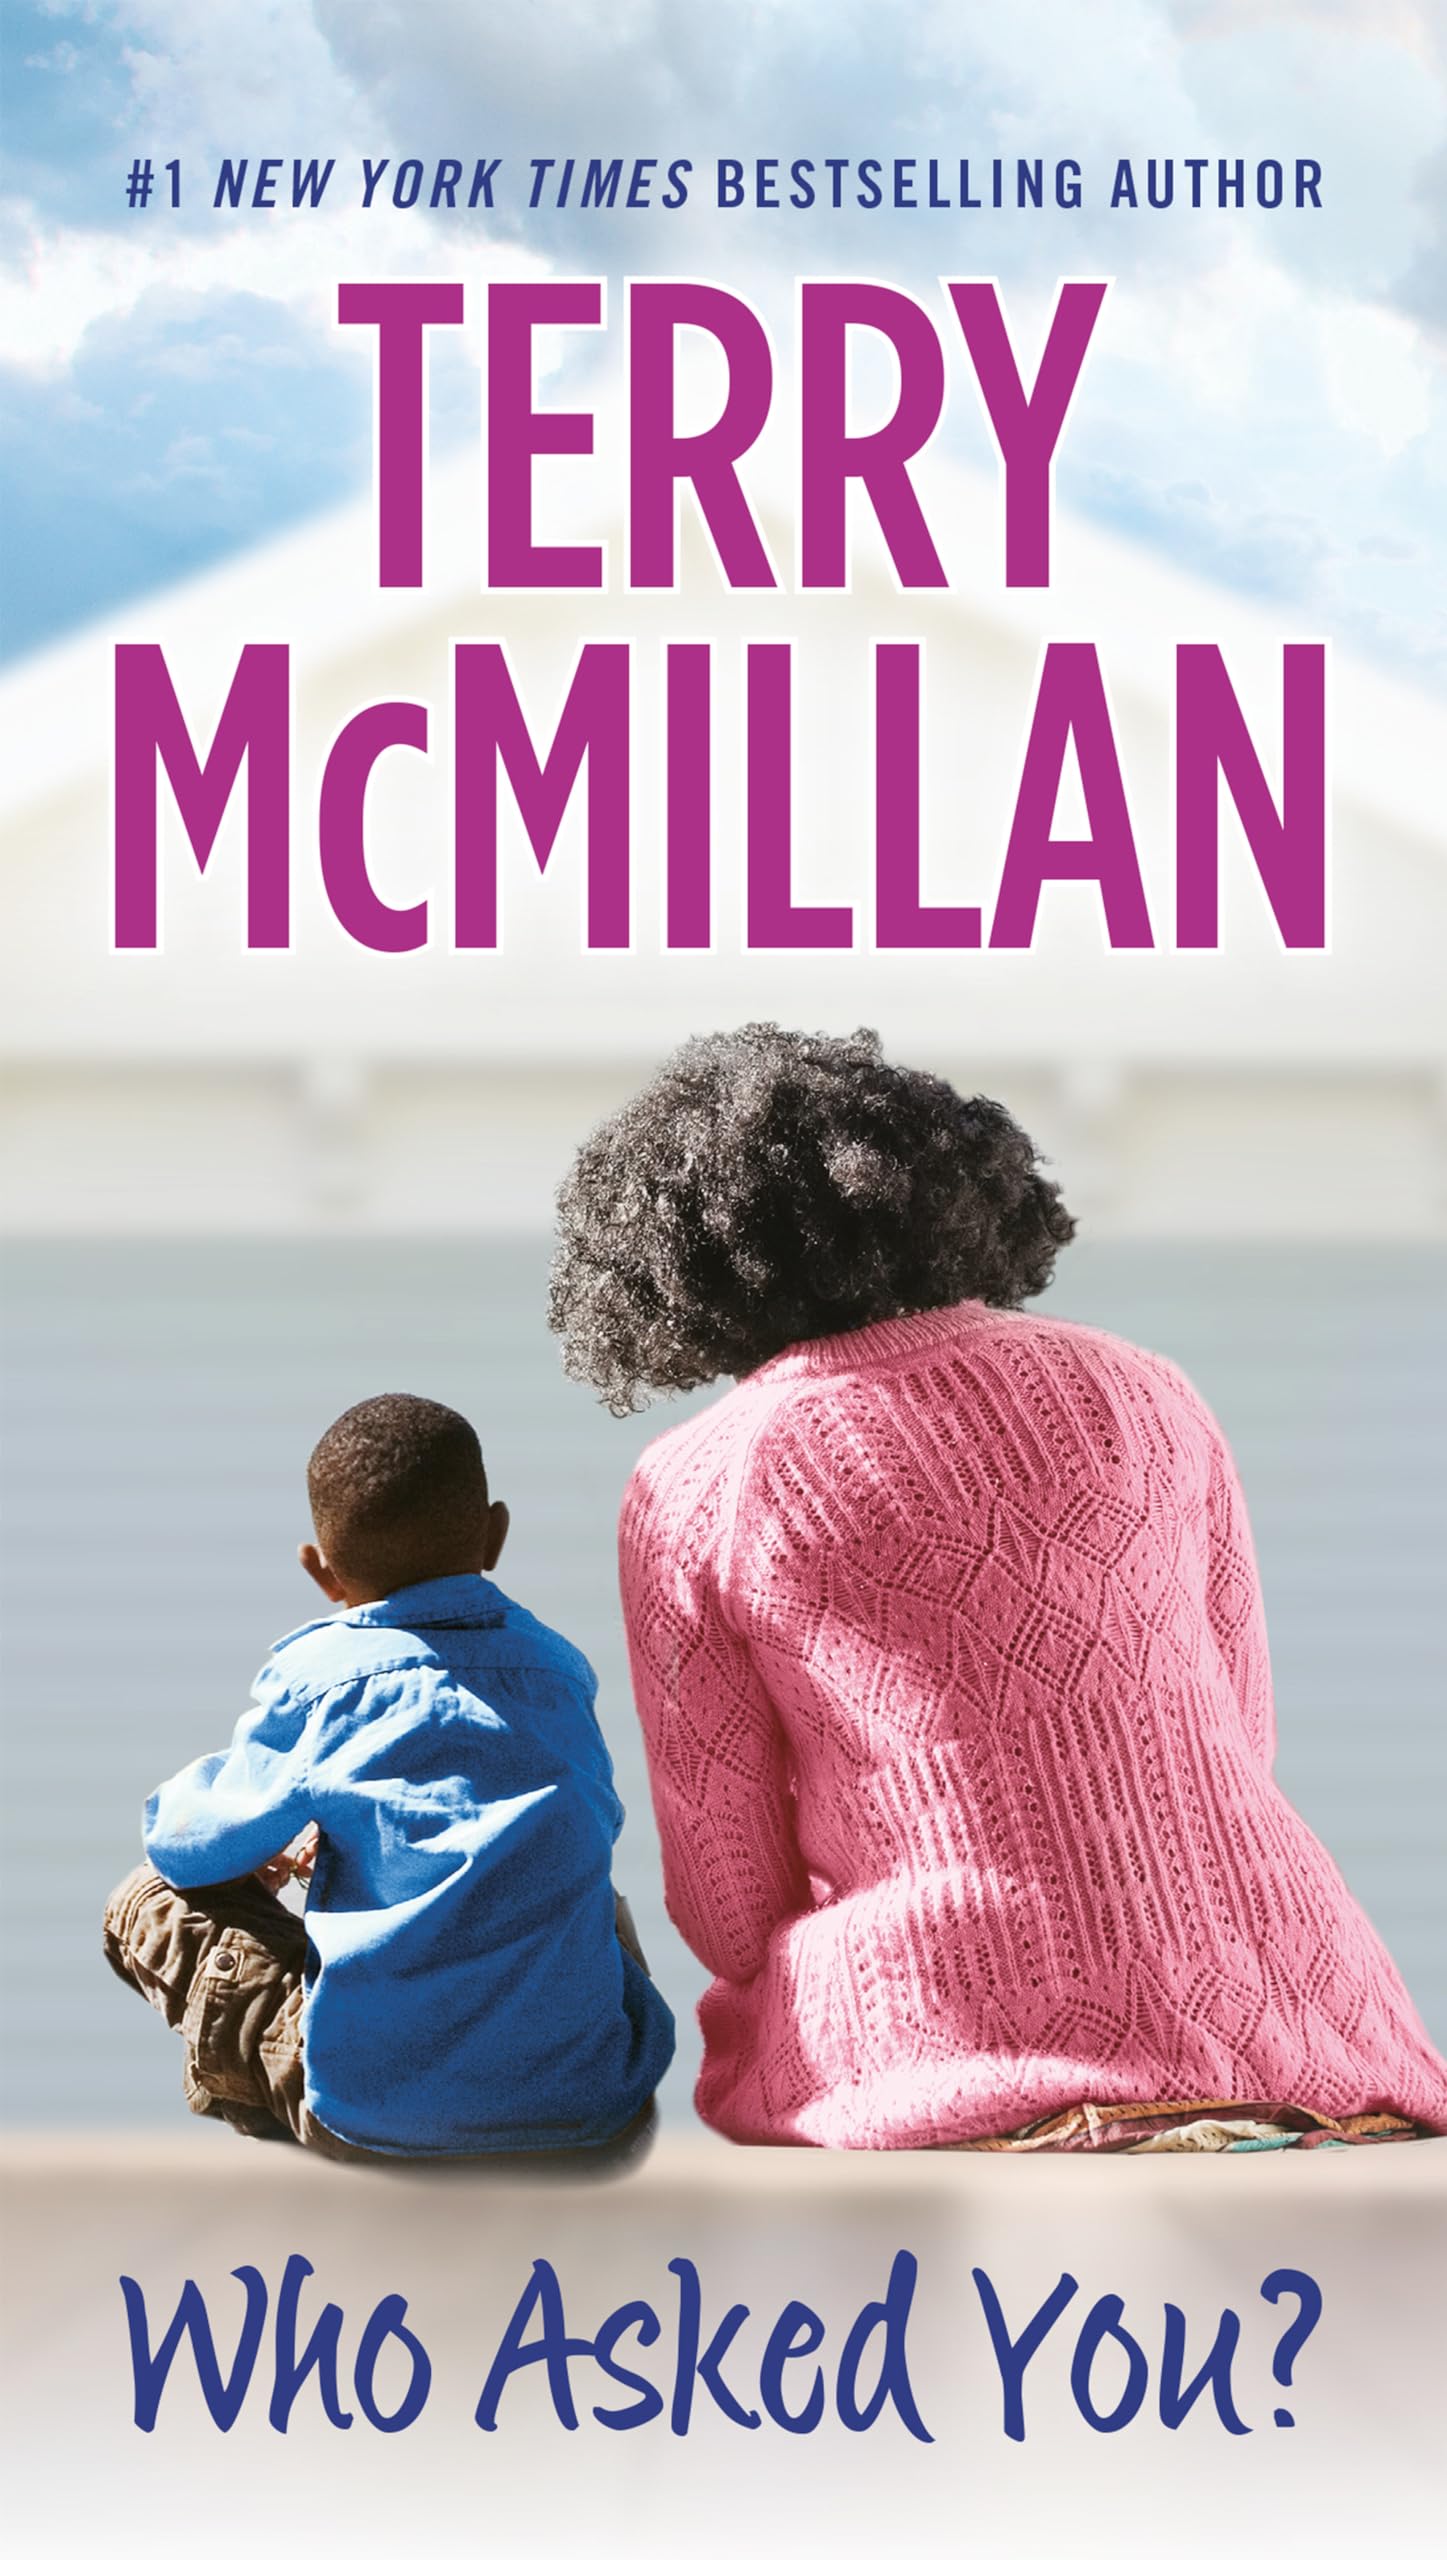 Who Asked You? - McMillan, Terry - Paperback - Acceptable - Picture 1 of 1